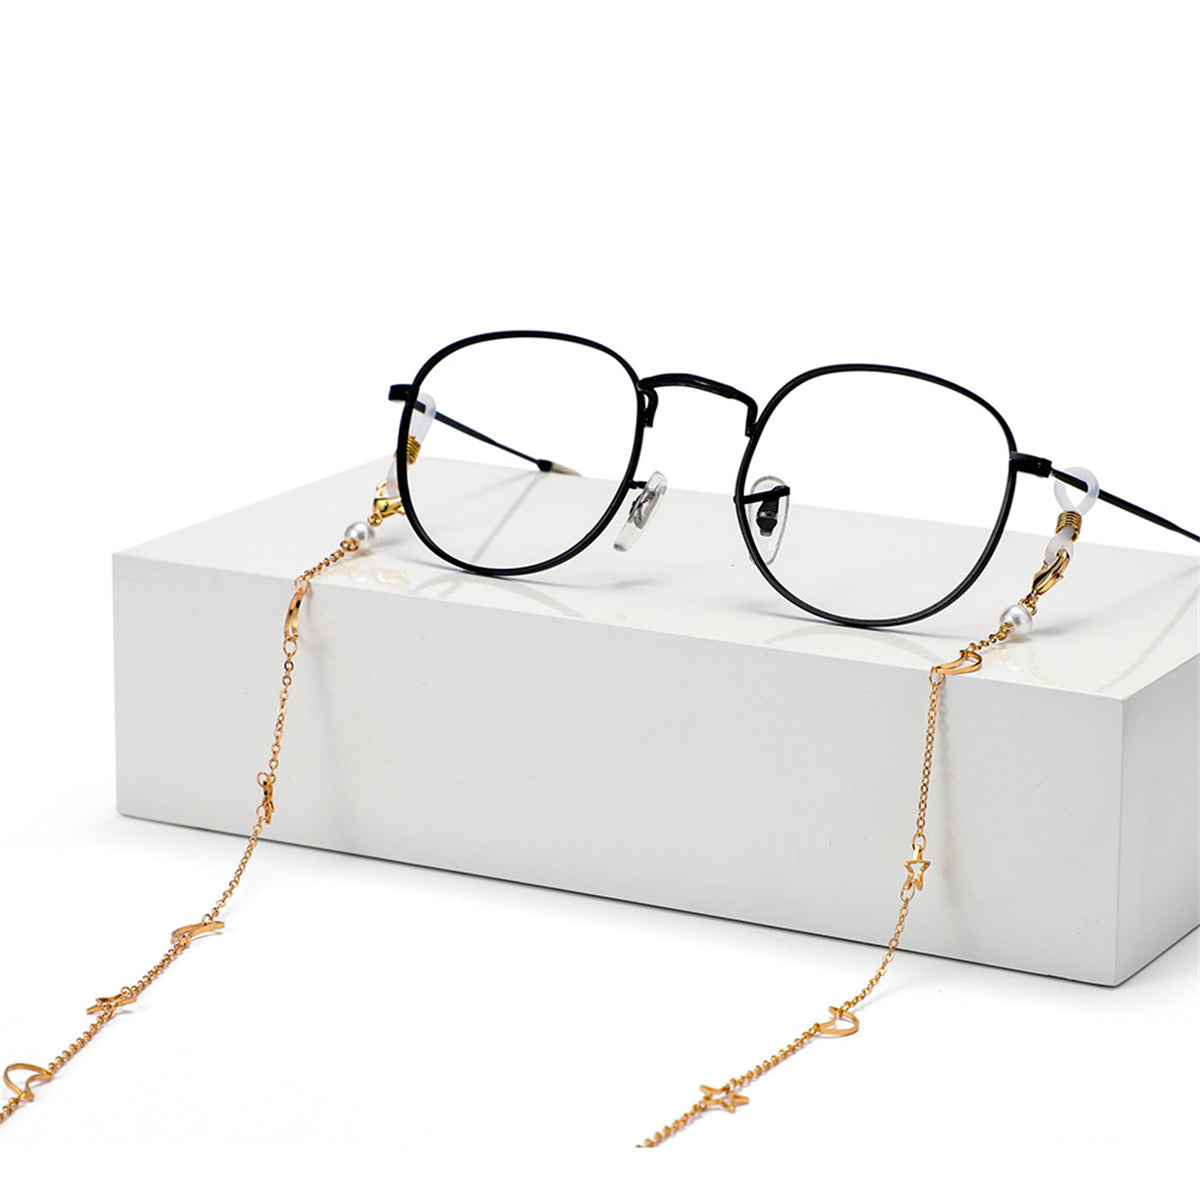 Pearl & 18K Gold-Plated Celestial Station Glasses Chain